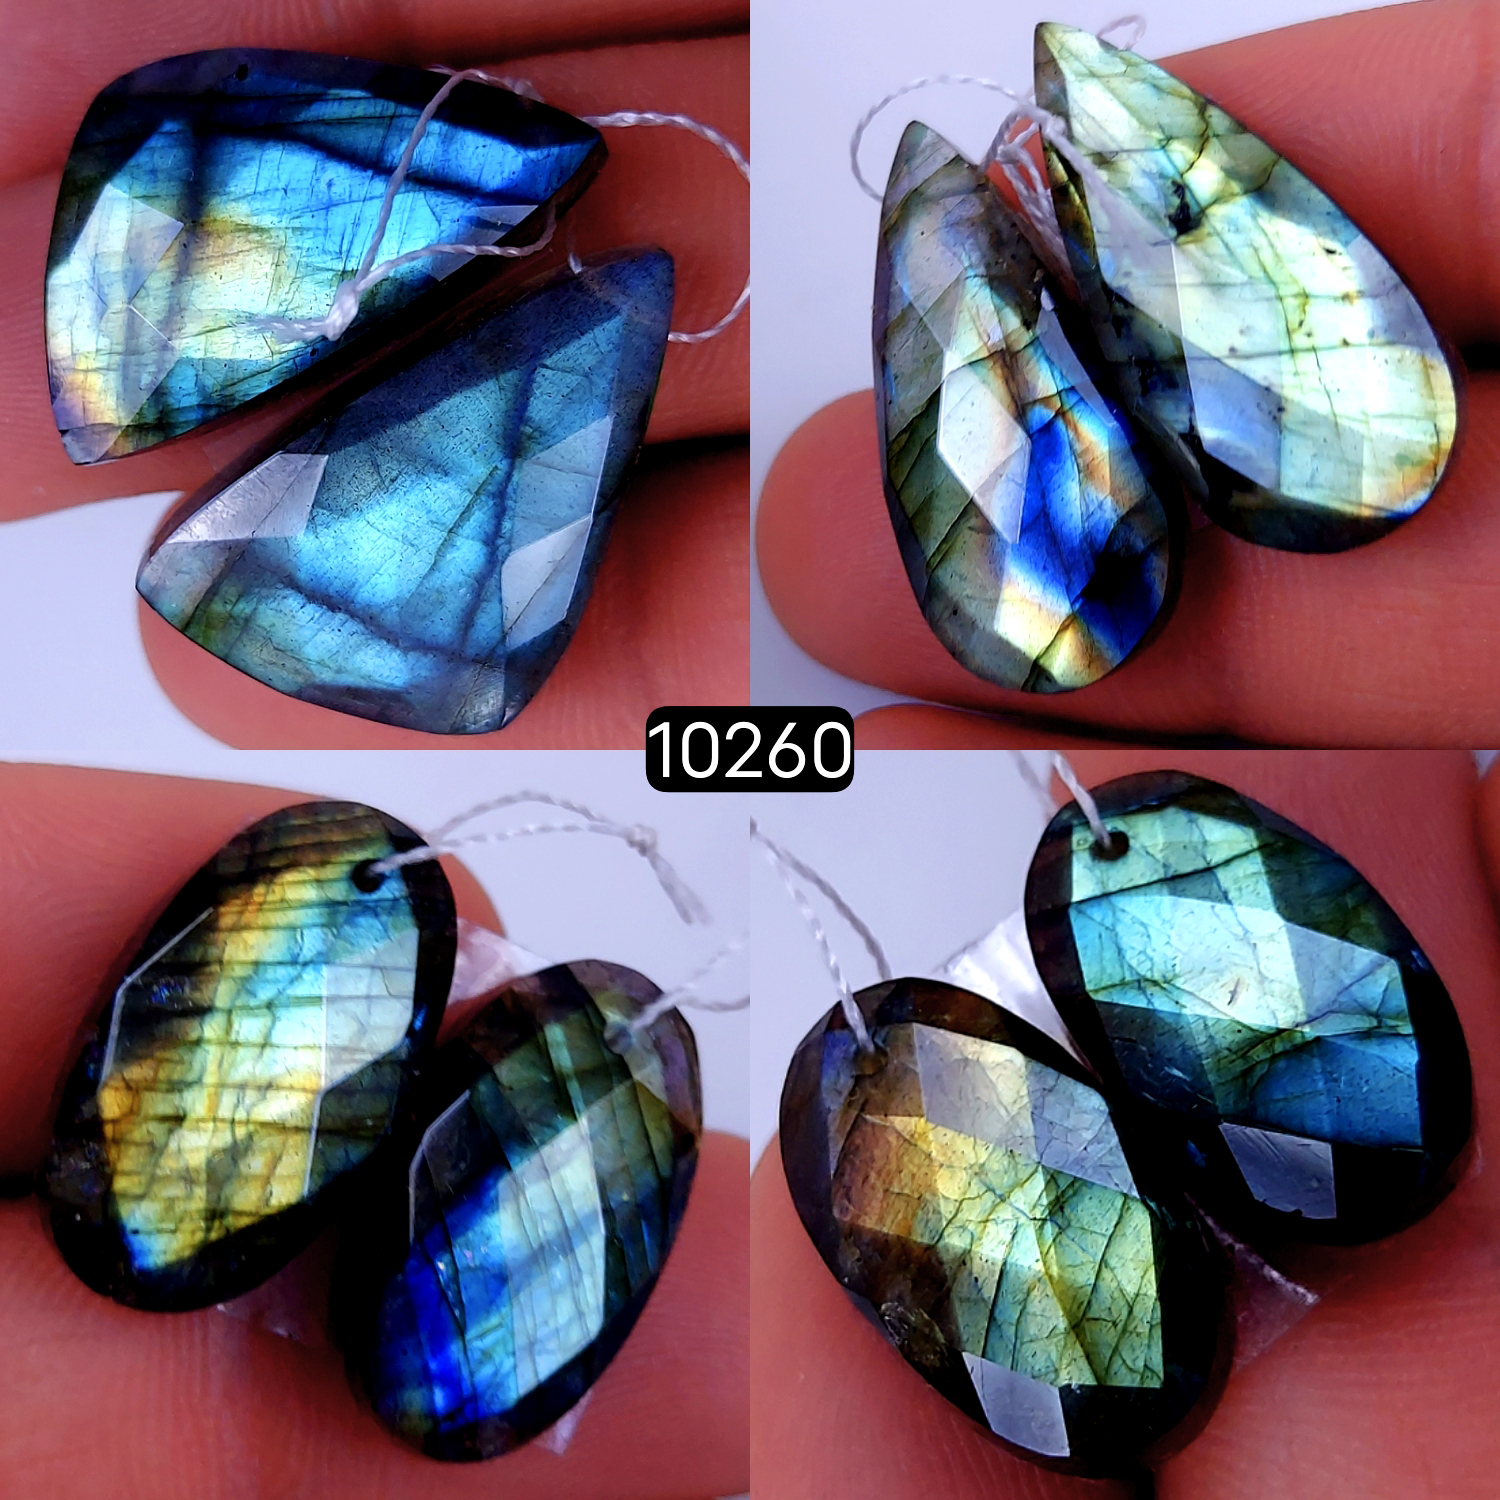 4Pair 122Cts Natural Labradorite Faceted Crystal Drill Dangle Drop Earring Pairs Silver Earrings Rose cut Labradorite Hoop Jewelry  28X12 18X10mm #10260